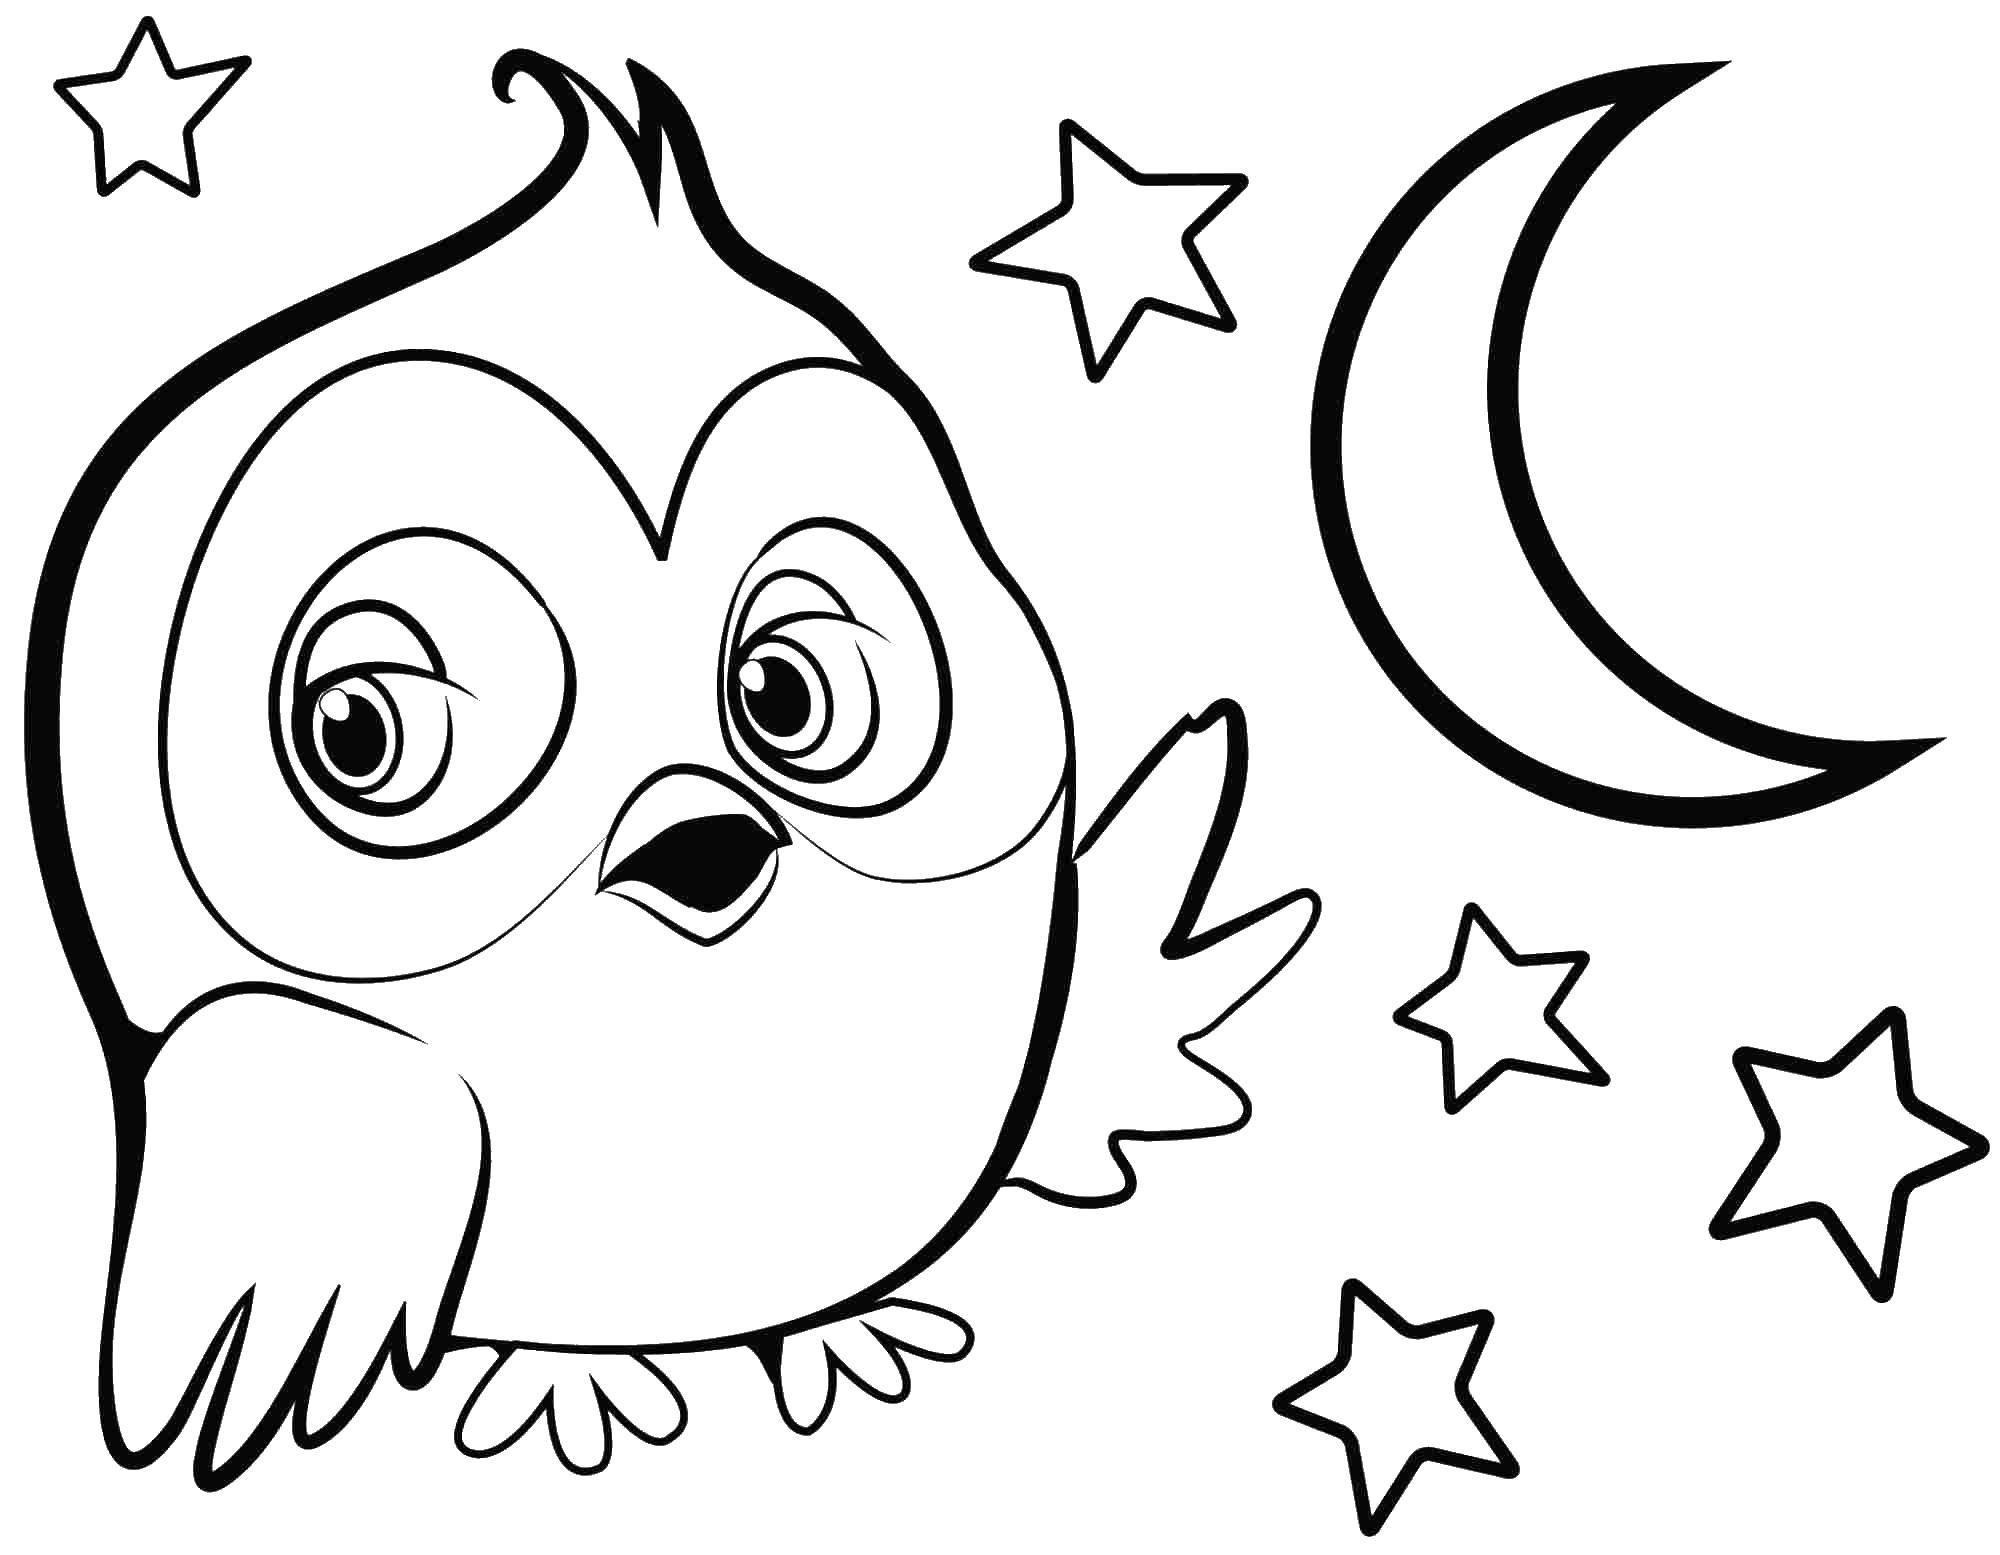 Coloring Owl. Category birds. Tags:  owl.